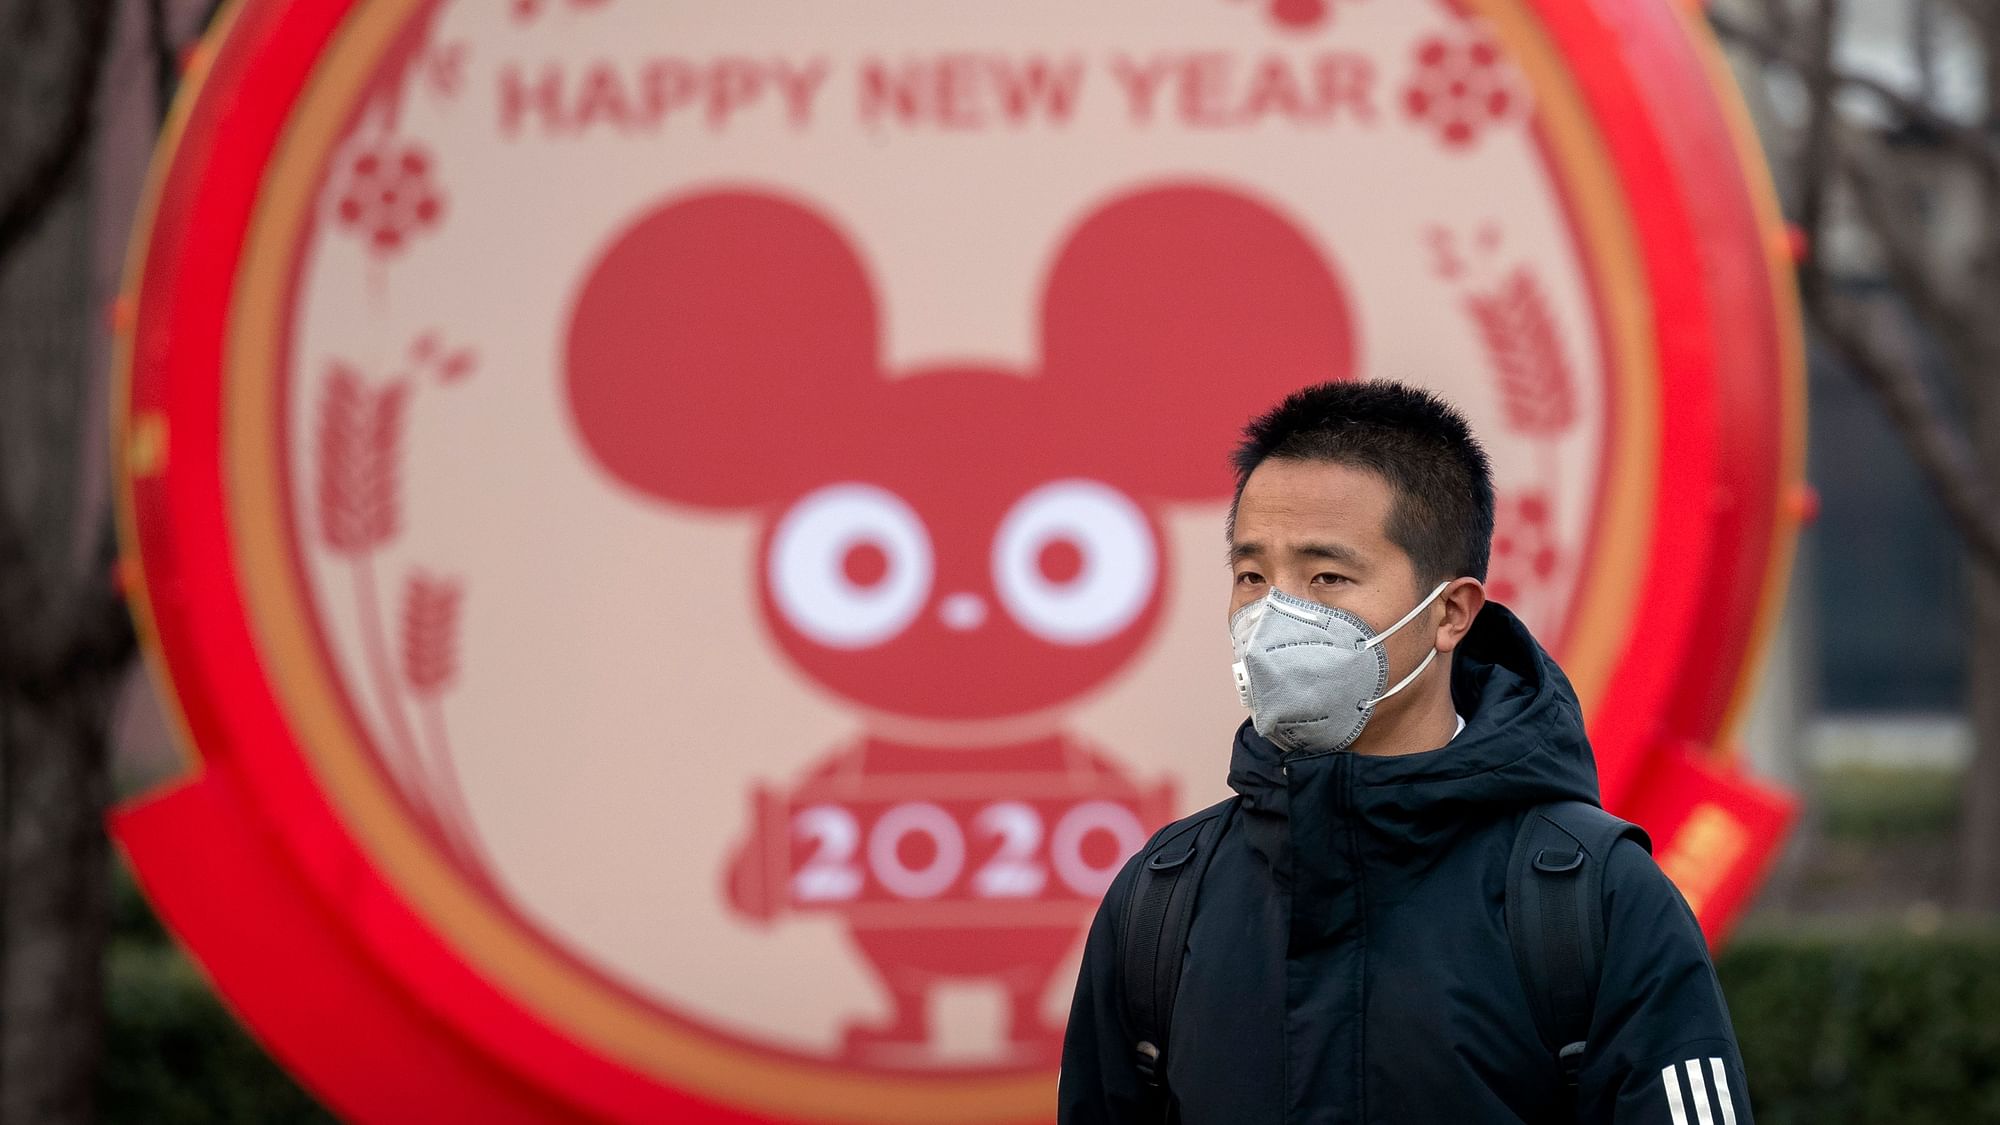 A man wears a face mask as he walks past a display for the upcoming Lunar New Year, the Year of the Rat, in Beijing on 22 January.